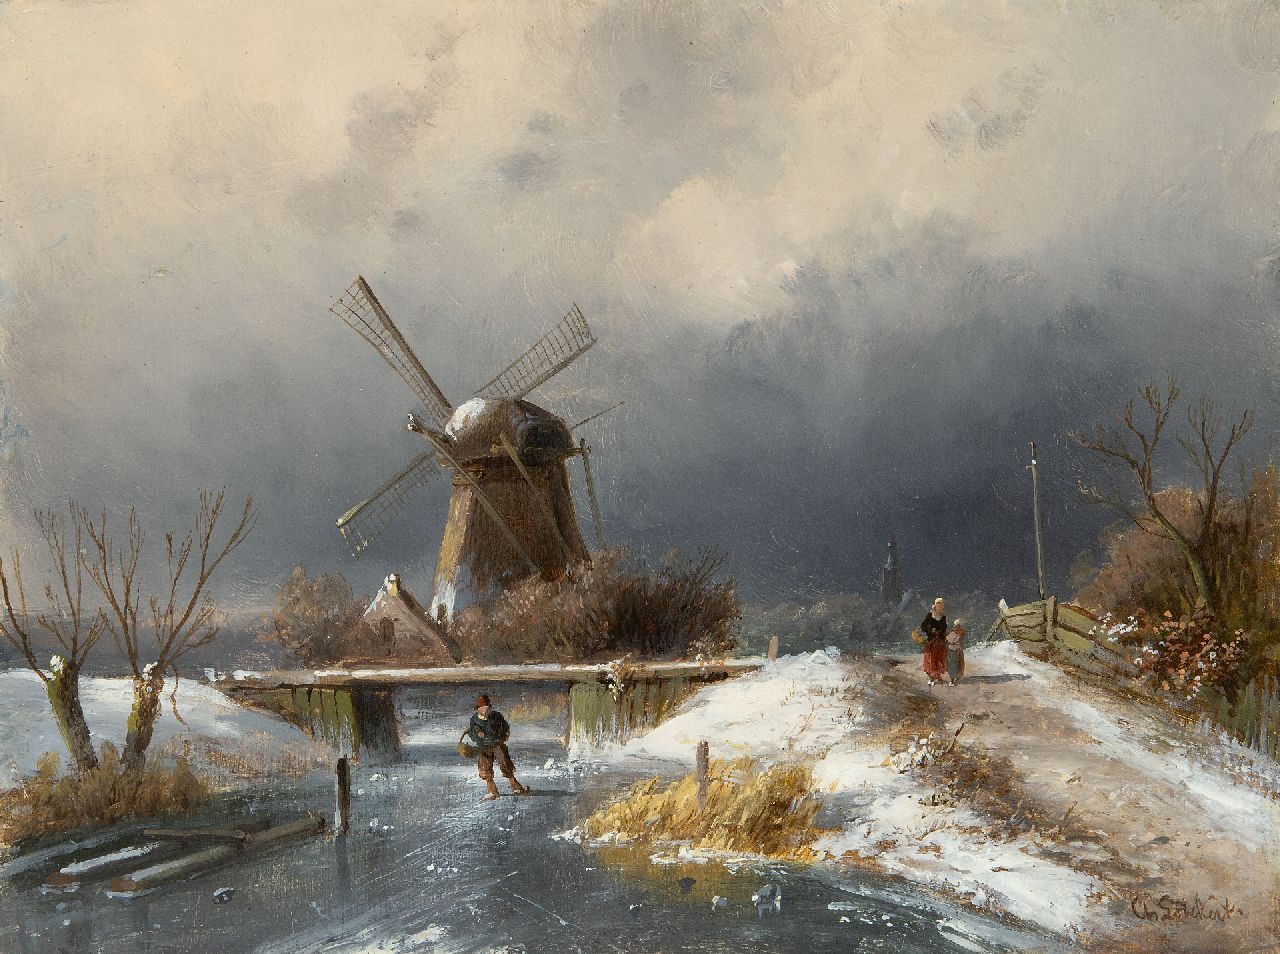 Leickert C.H.J.  | 'Charles' Henri Joseph Leickert, Skater on a frozen water at a windmill, oil on panel 19.2 x 26.0 cm, signed l.r.